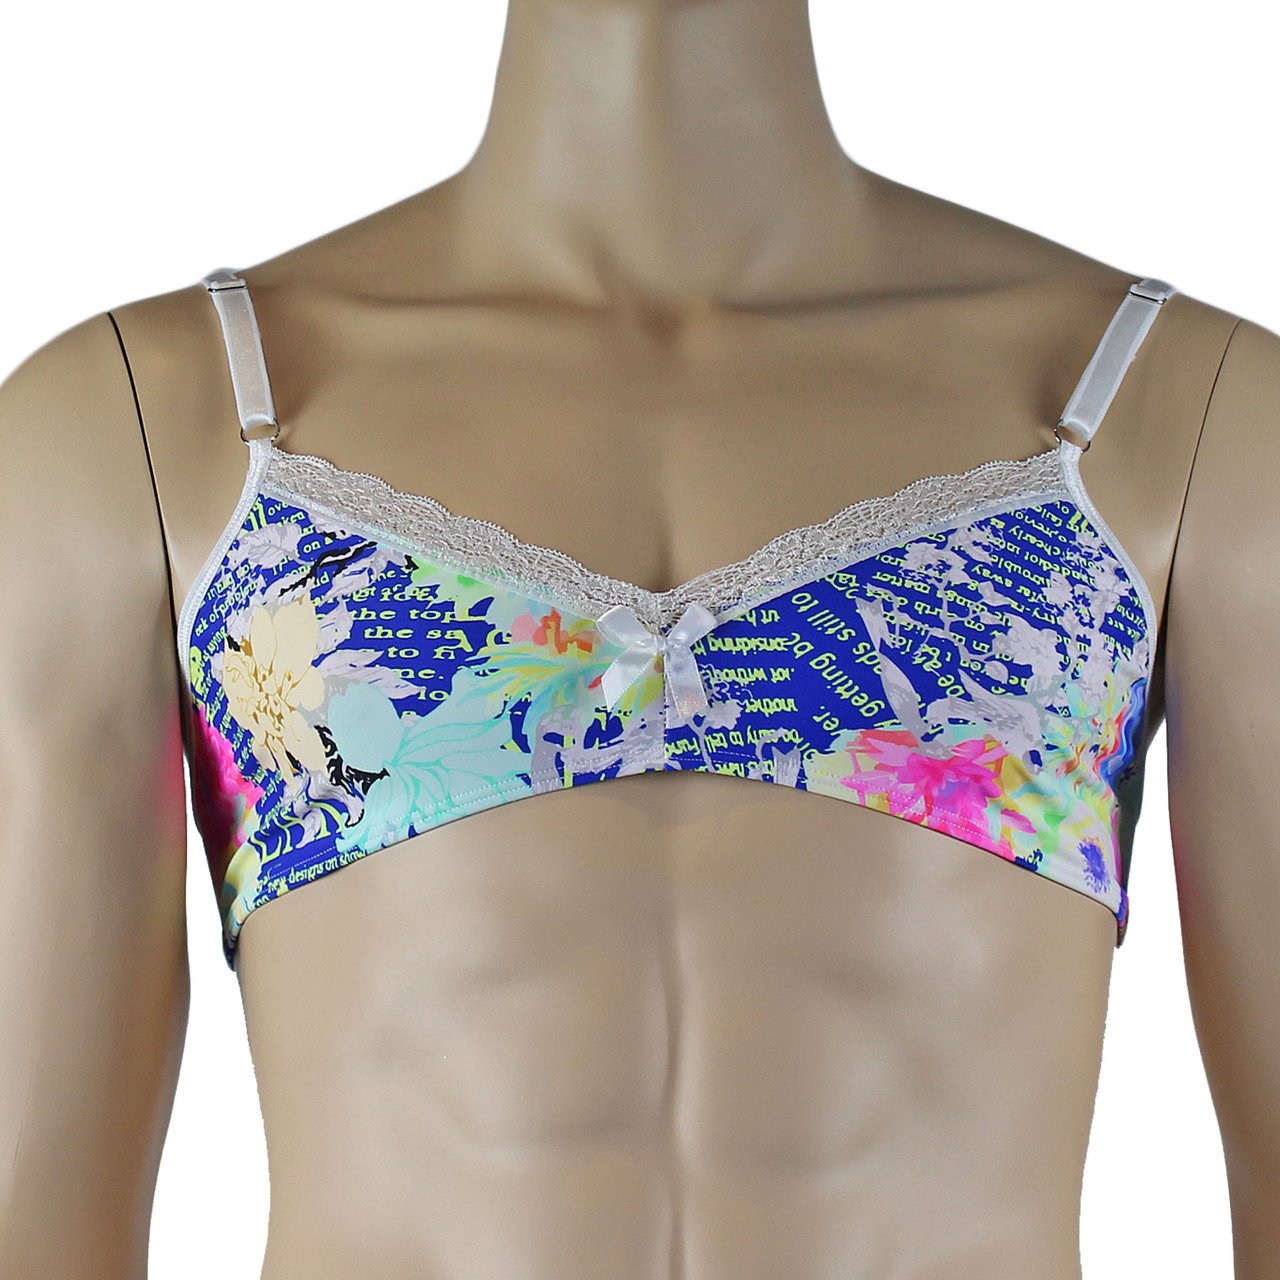 Mens Suzanne Floral Bra Top & G string Thong